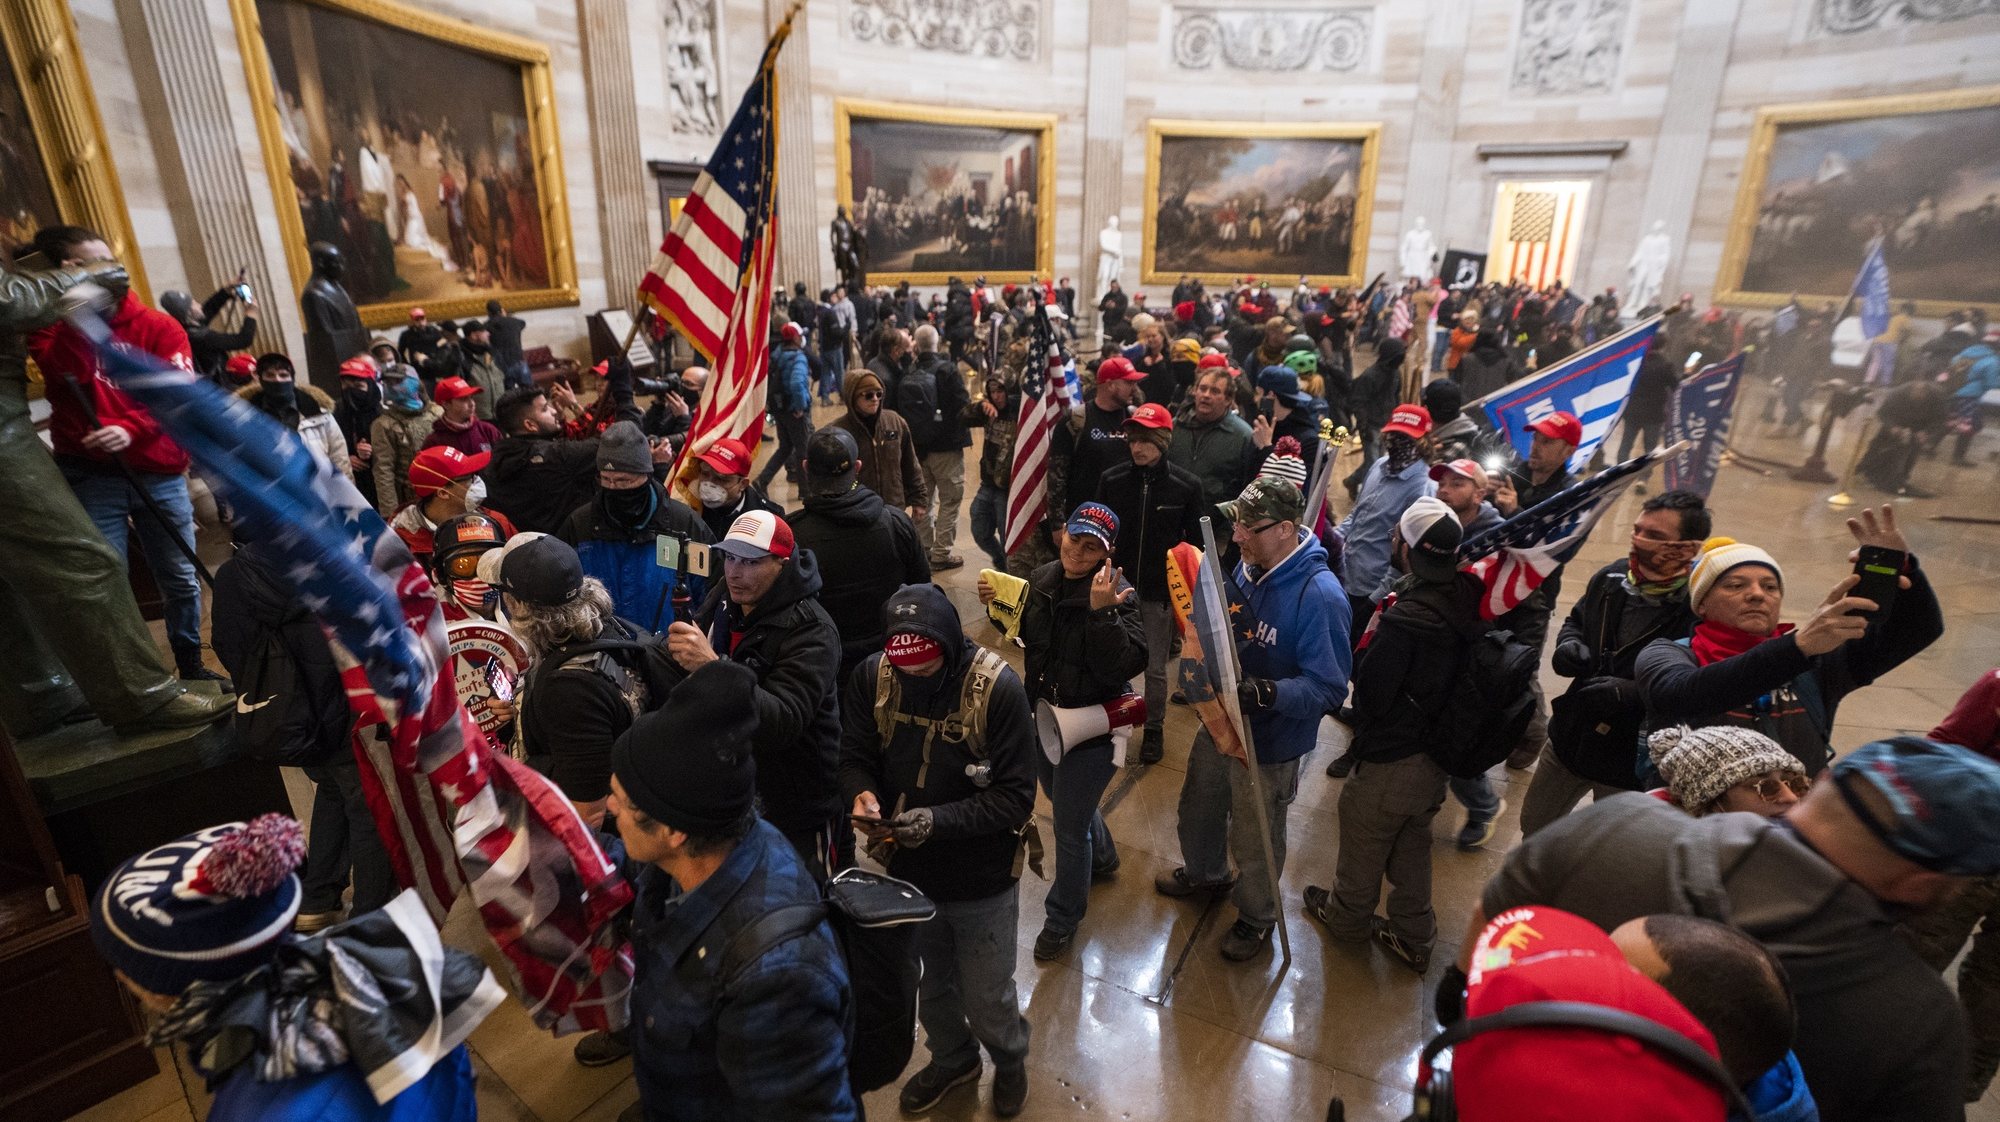 epa09010704 (FILE) - Supporters of US President Donald J. Trump in the Capitol Rotunda after breaching Capitol security in Washington, DC, USA, 06 January 2021 (reissued 13 February 2021). The US Senate on 13 February 2021 voted to acquit former US president Trump in his impeachment trial held on the charge of incitement of insurrection for his role in 06 January violent attack on the US Capitol.  EPA/JIM LO SCALZO *** Local Caption *** 56604603